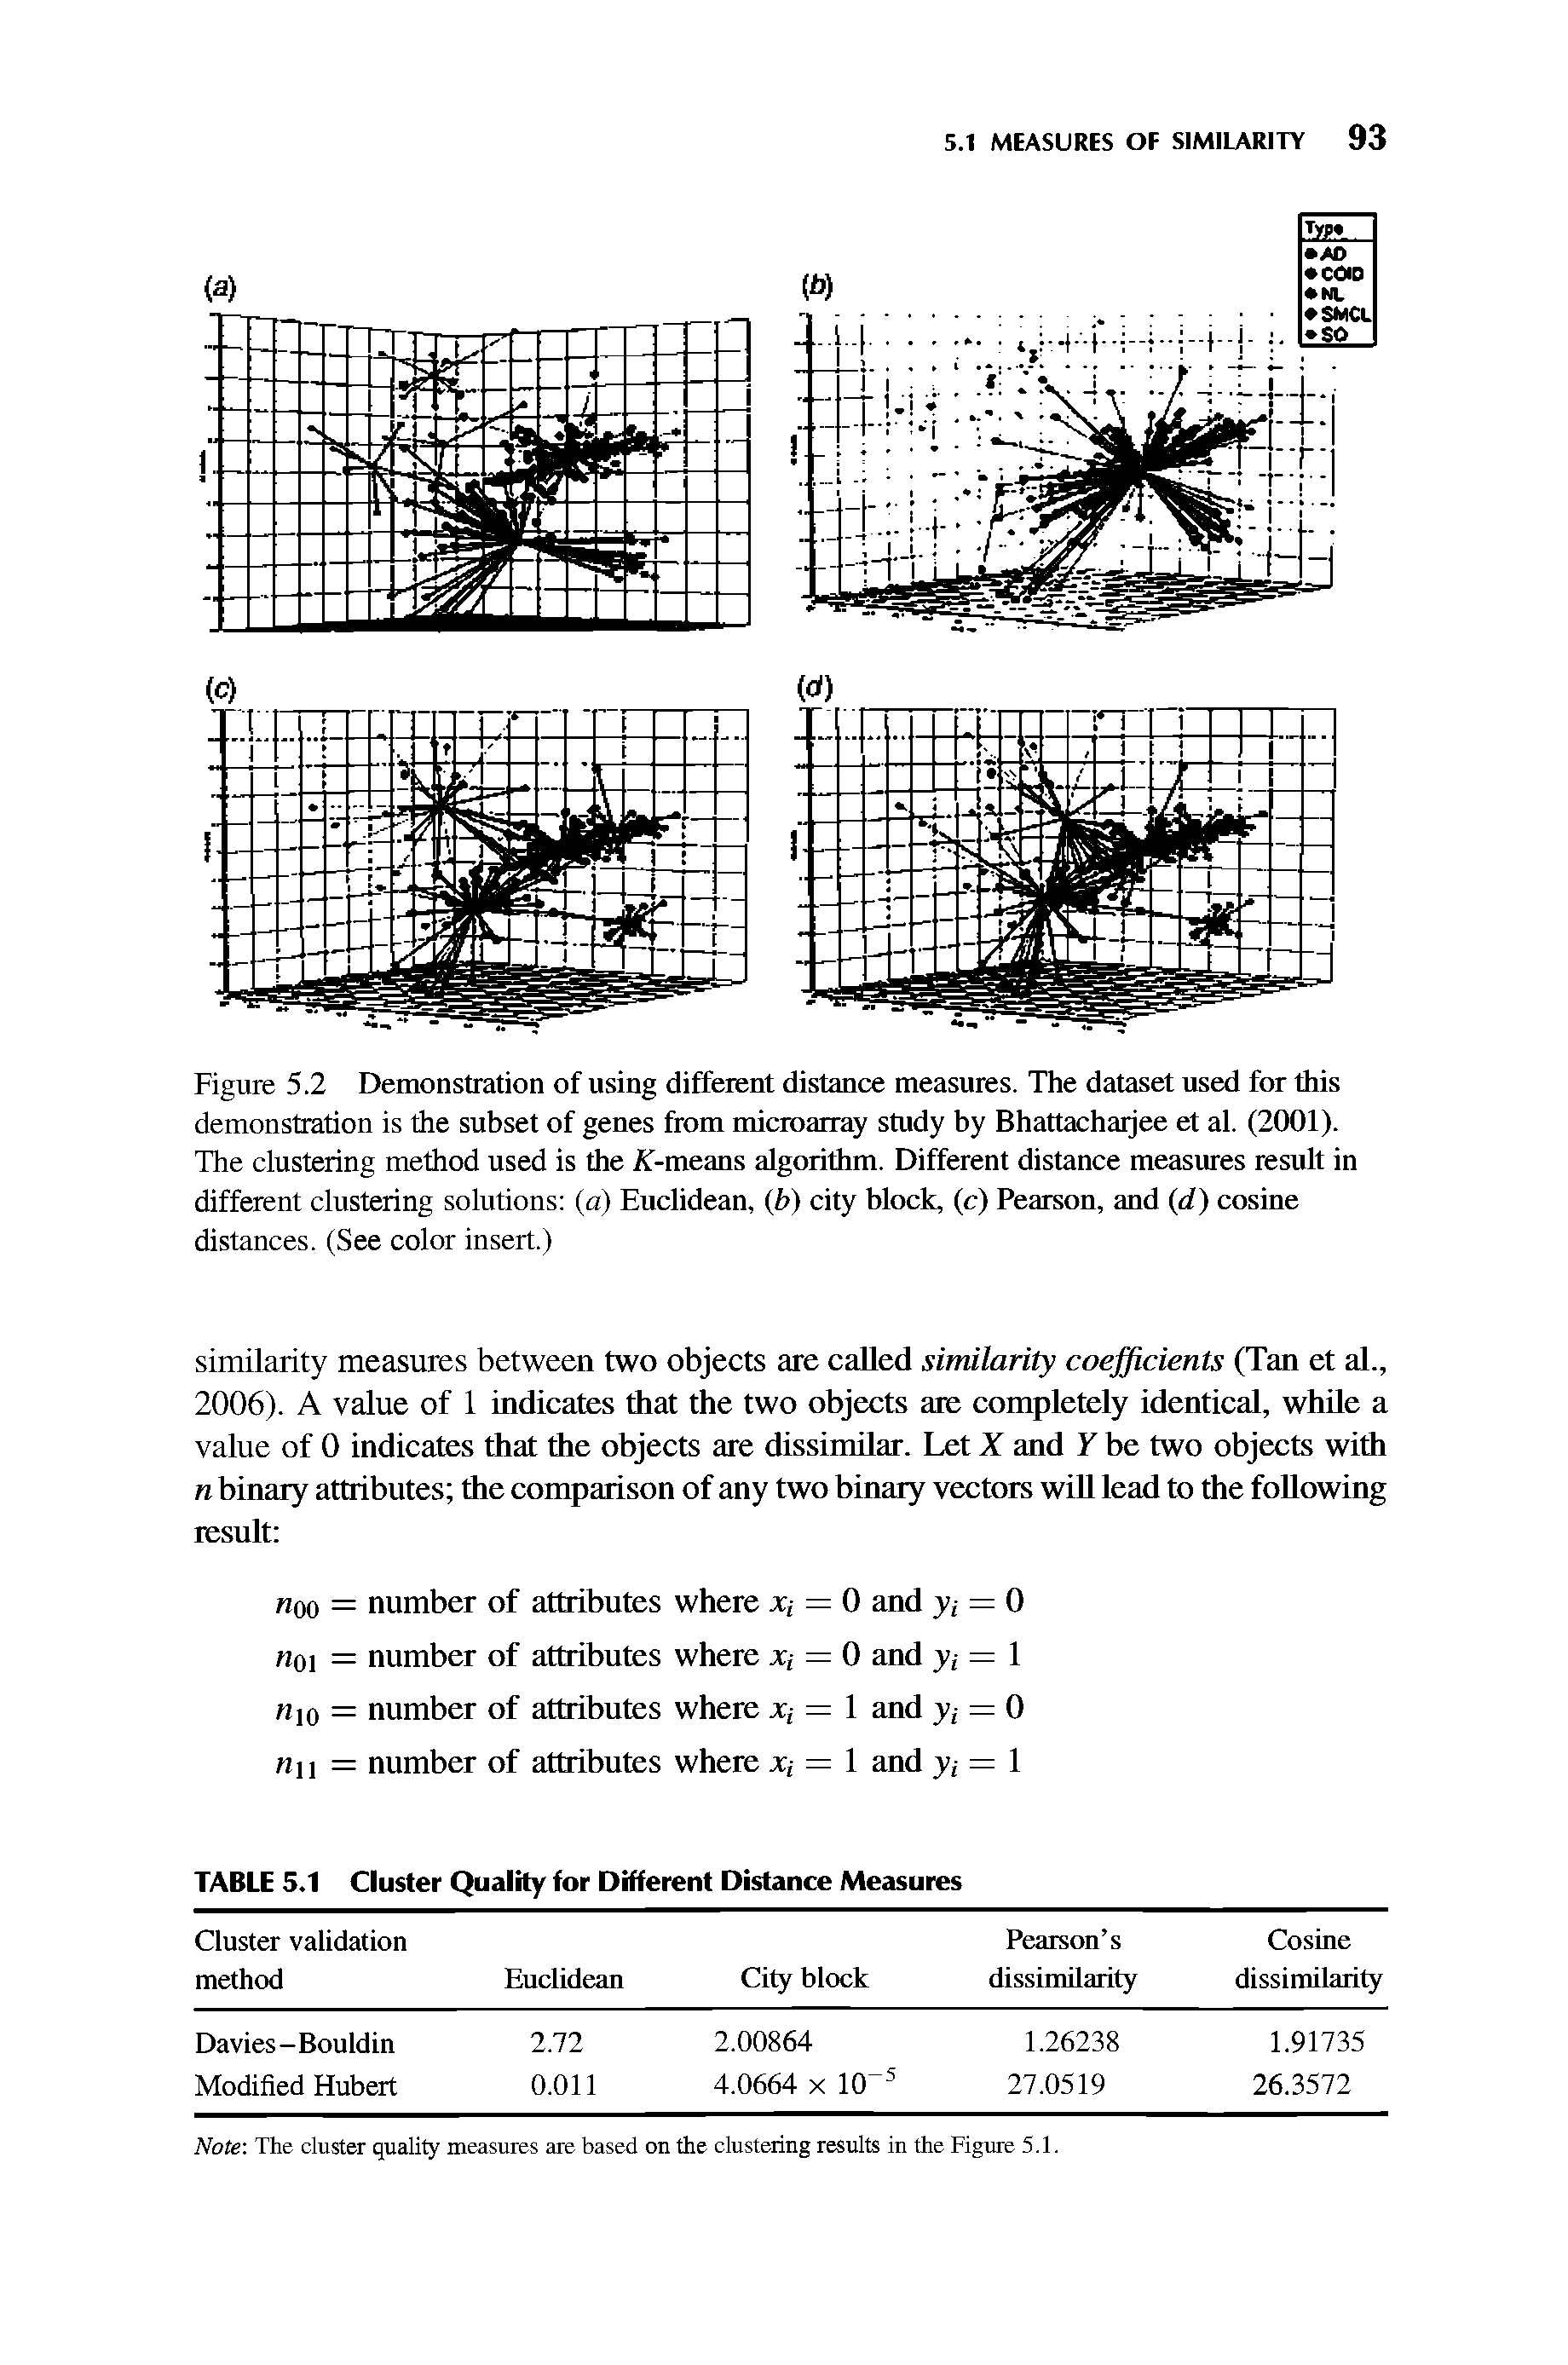 Figure 5.2 Demonstration of using different distance measures. The dataset used for this demonstration is the subset of genes from microarray study by Bhattachaijee et al. (2001). The clustering method used is the T-means algorithm. Different distance measures result in different clustering solutions a) Euclidean, b) city block, (c) Pearson, and (rf) cosine distances. (See color insert.)...